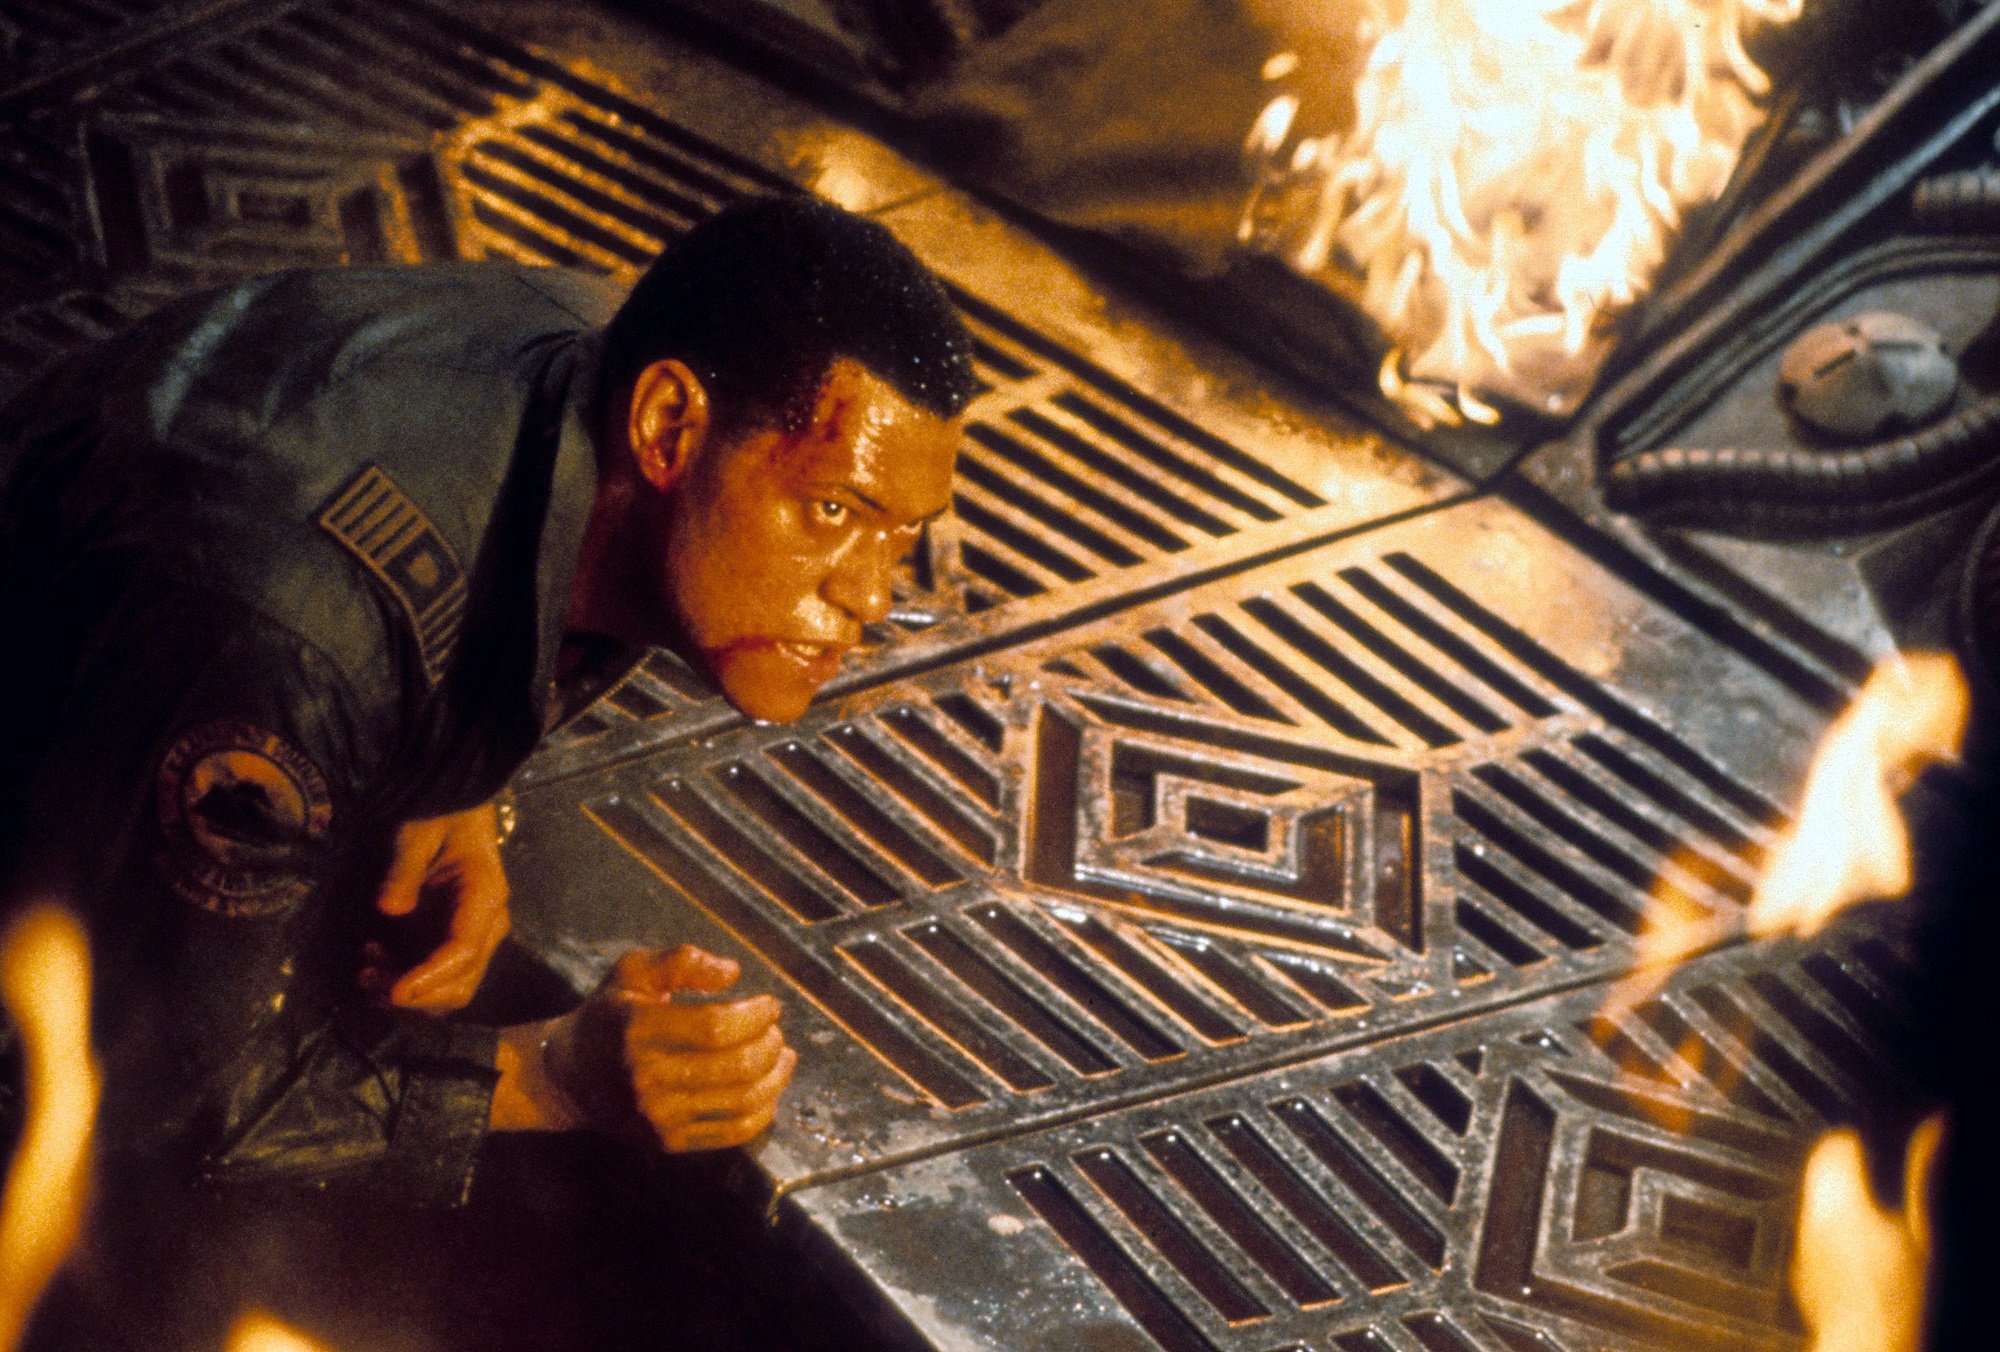 Event Horizon star Laurence Fishburne on the floor of a spaceship